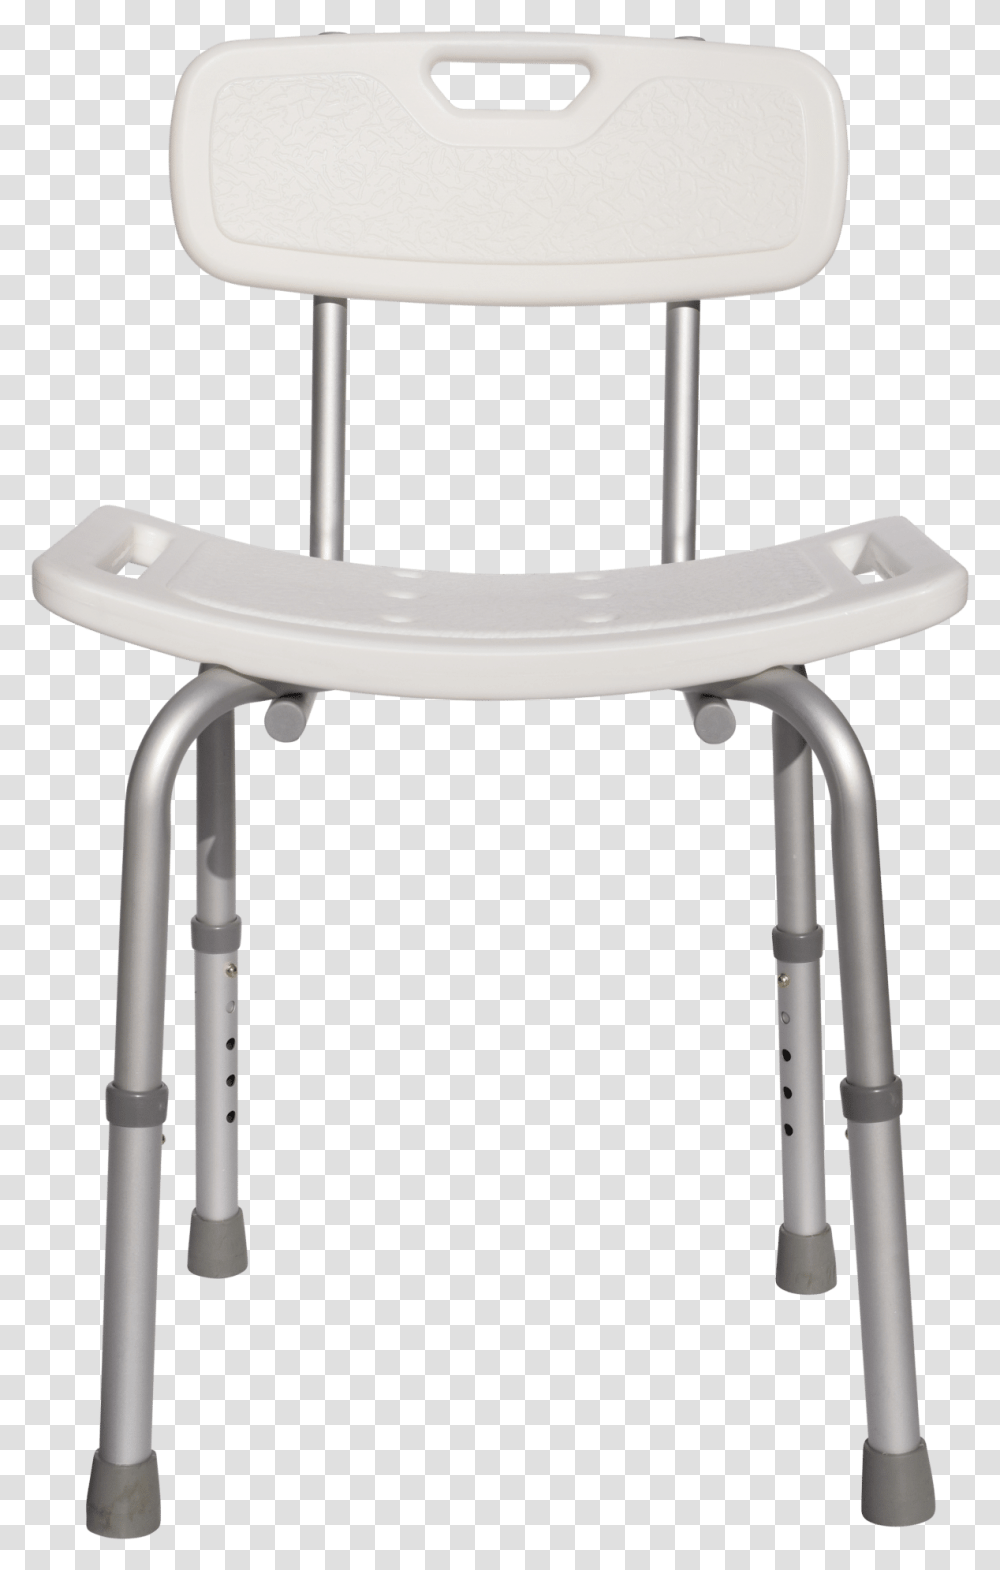 Chair, Furniture, Sink Faucet, Cushion, Table Transparent Png